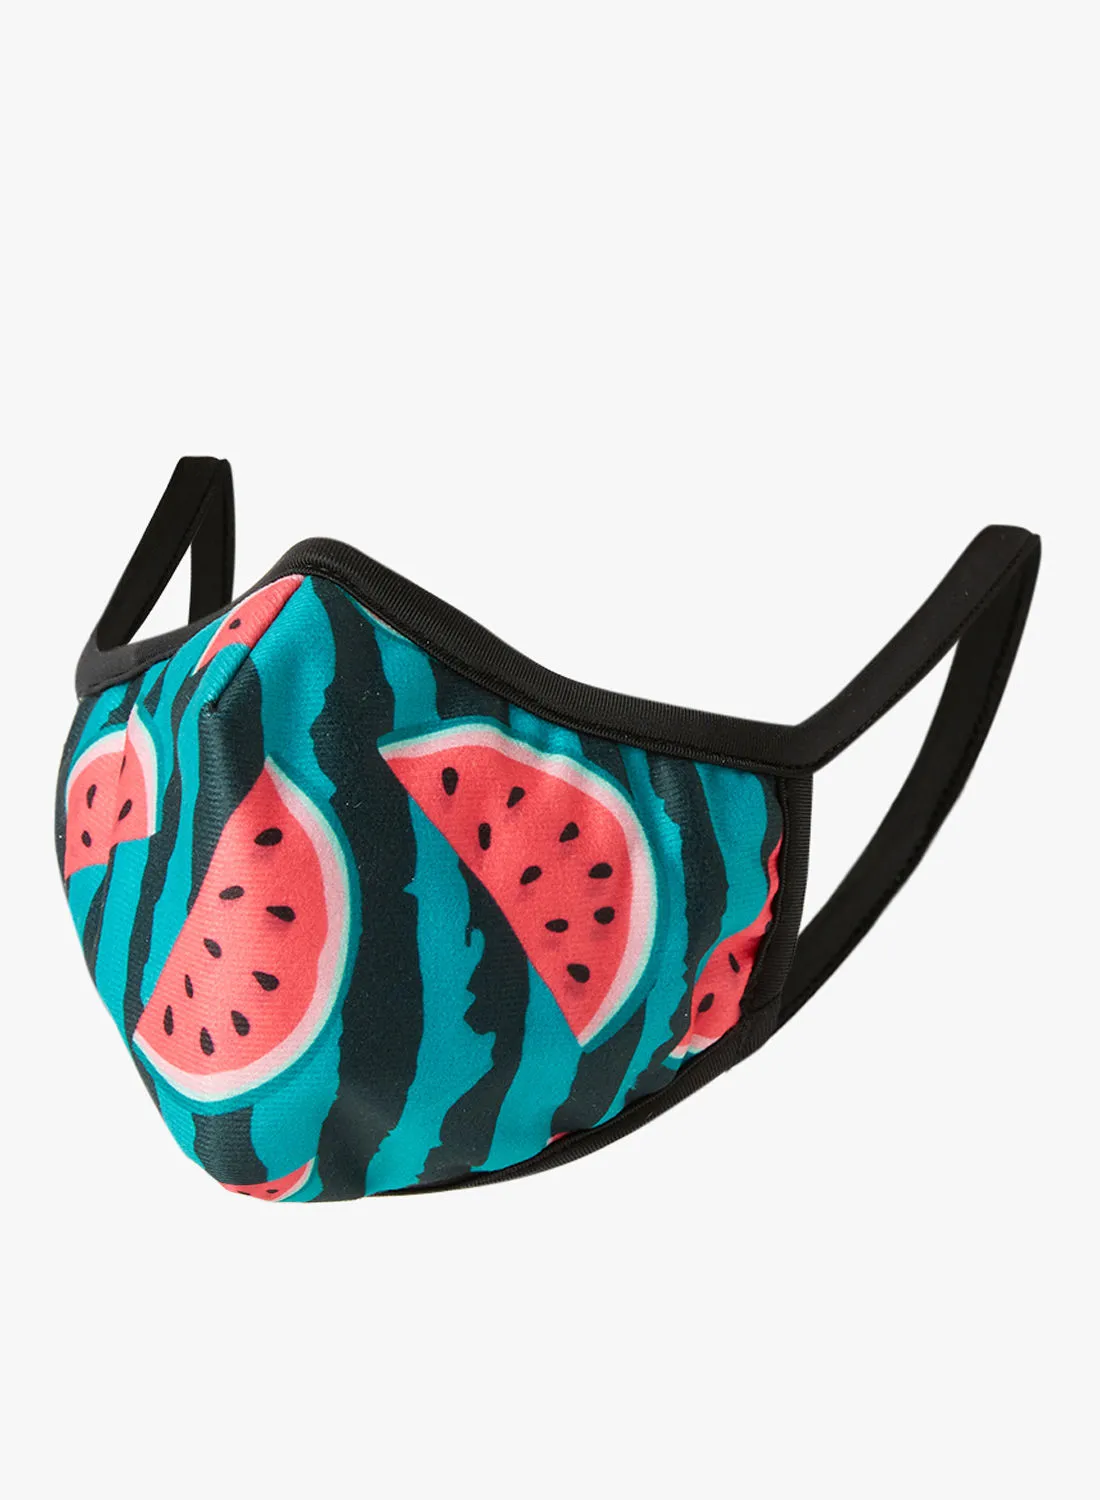 Nomad Mask Unisex Watermelon Print Face Mask Green